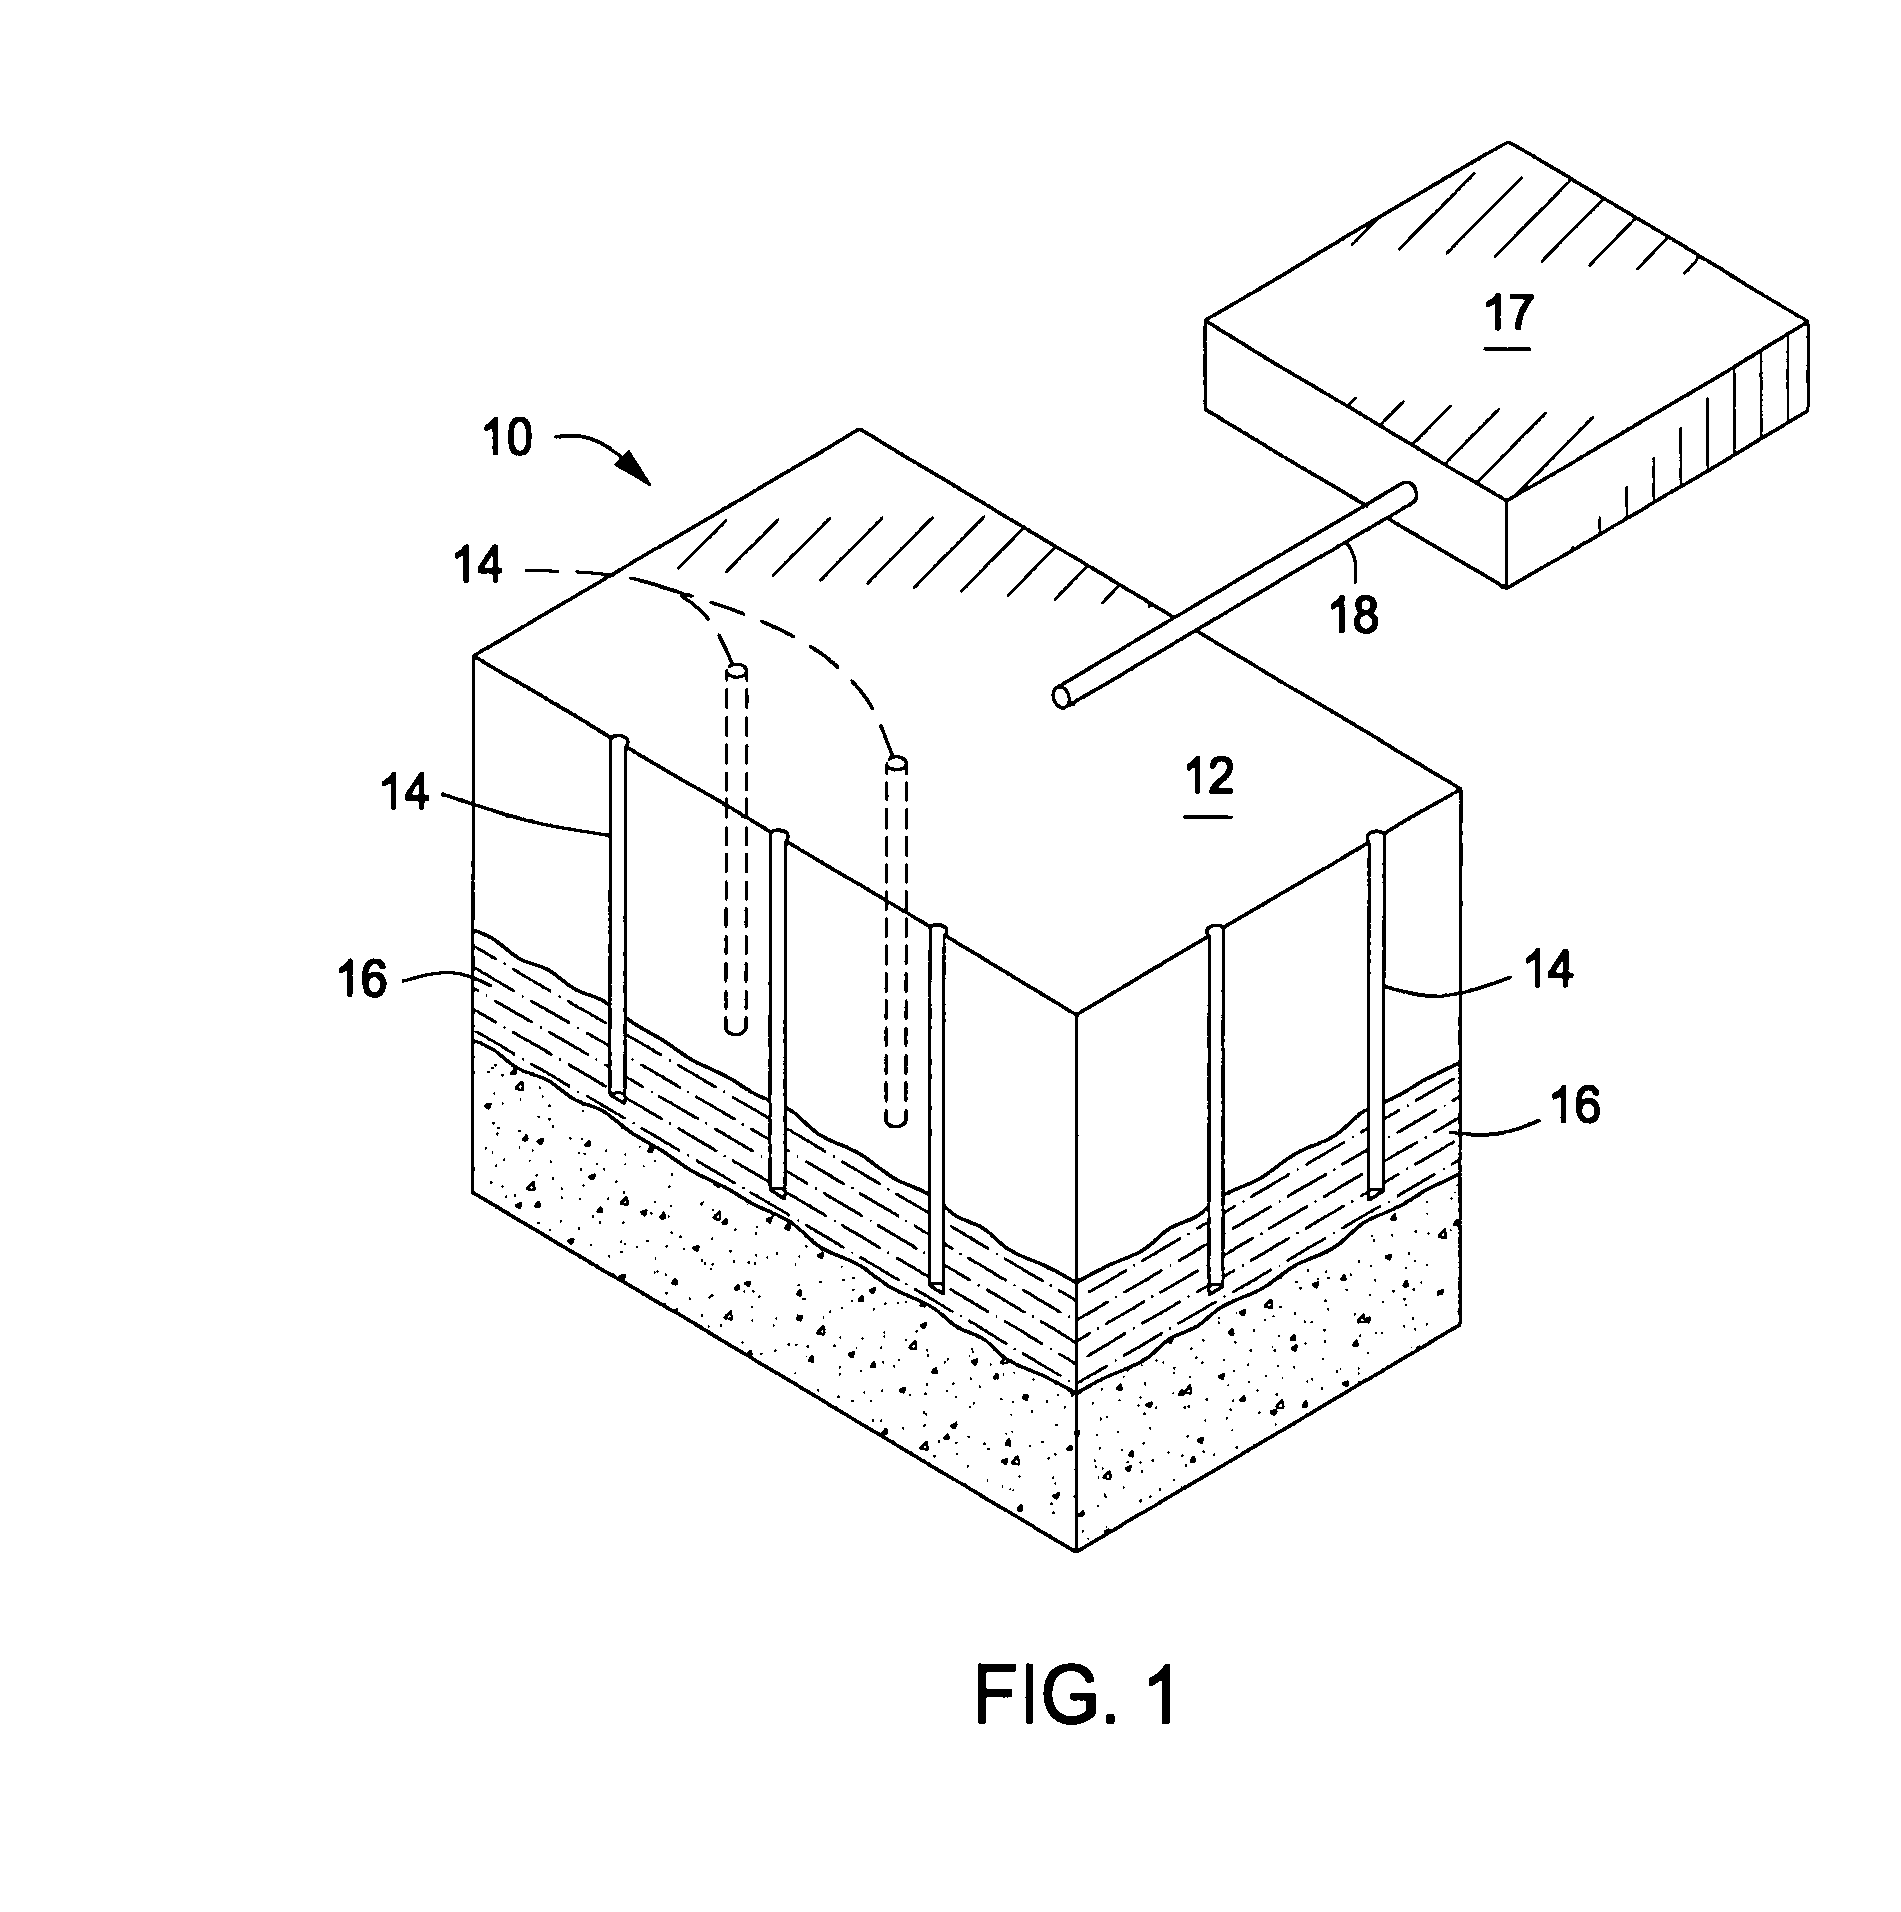 Method of developing subsurface freeze zone